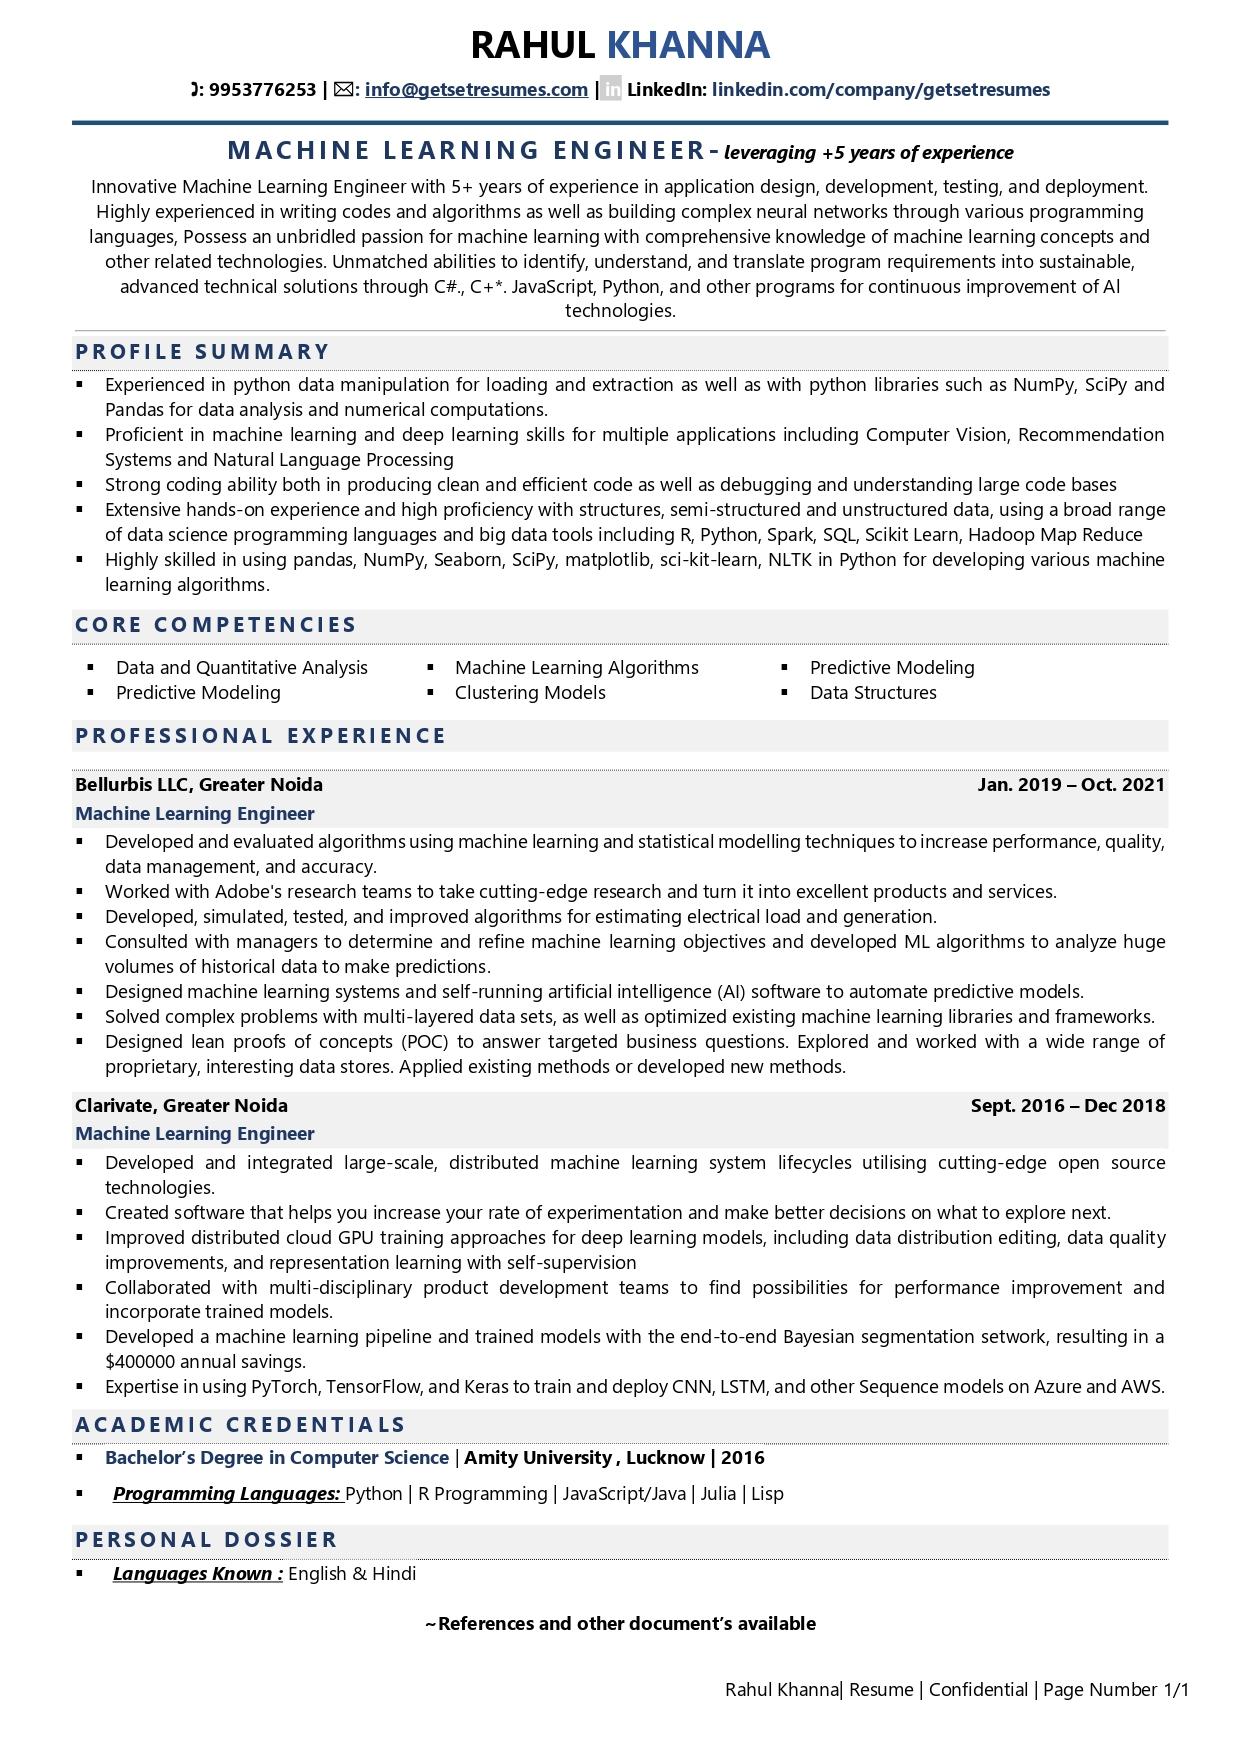 Machine Learning Engineer Resume Examples & Template (with job winning